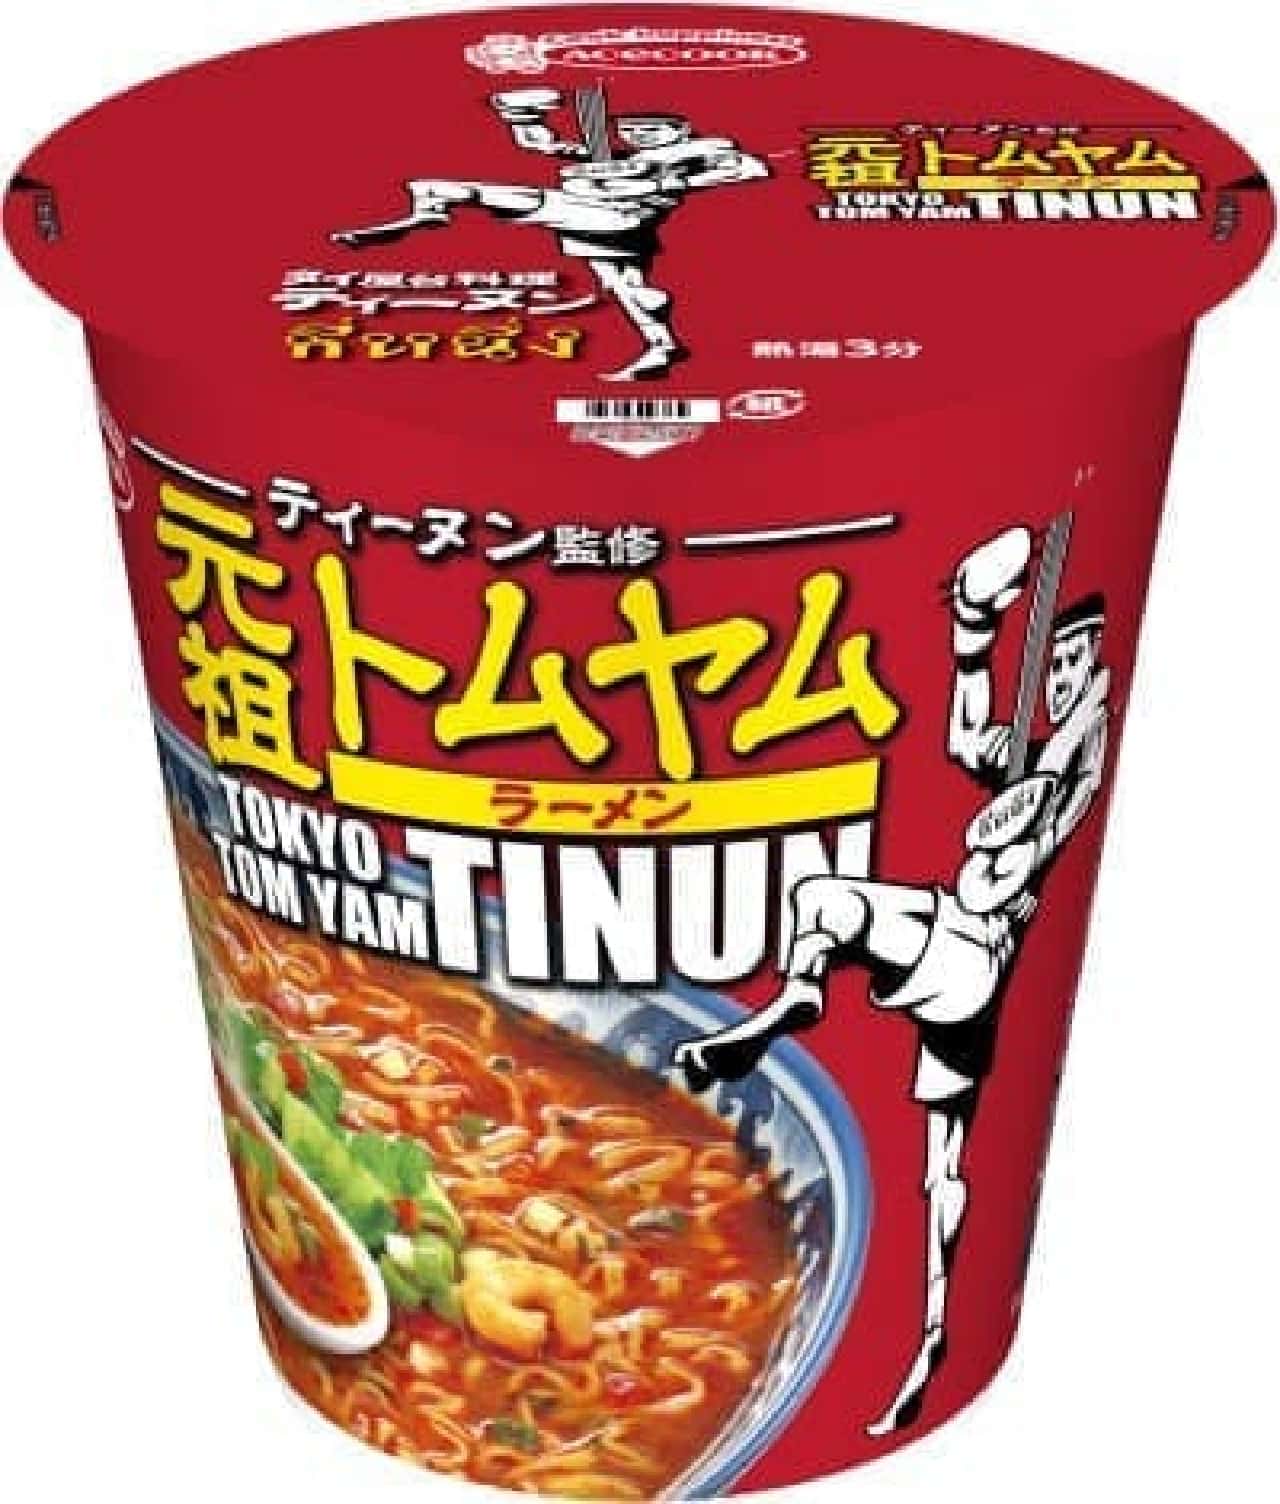 The taste of Tinun's Tom Yum Ramen is in the cup noodles!